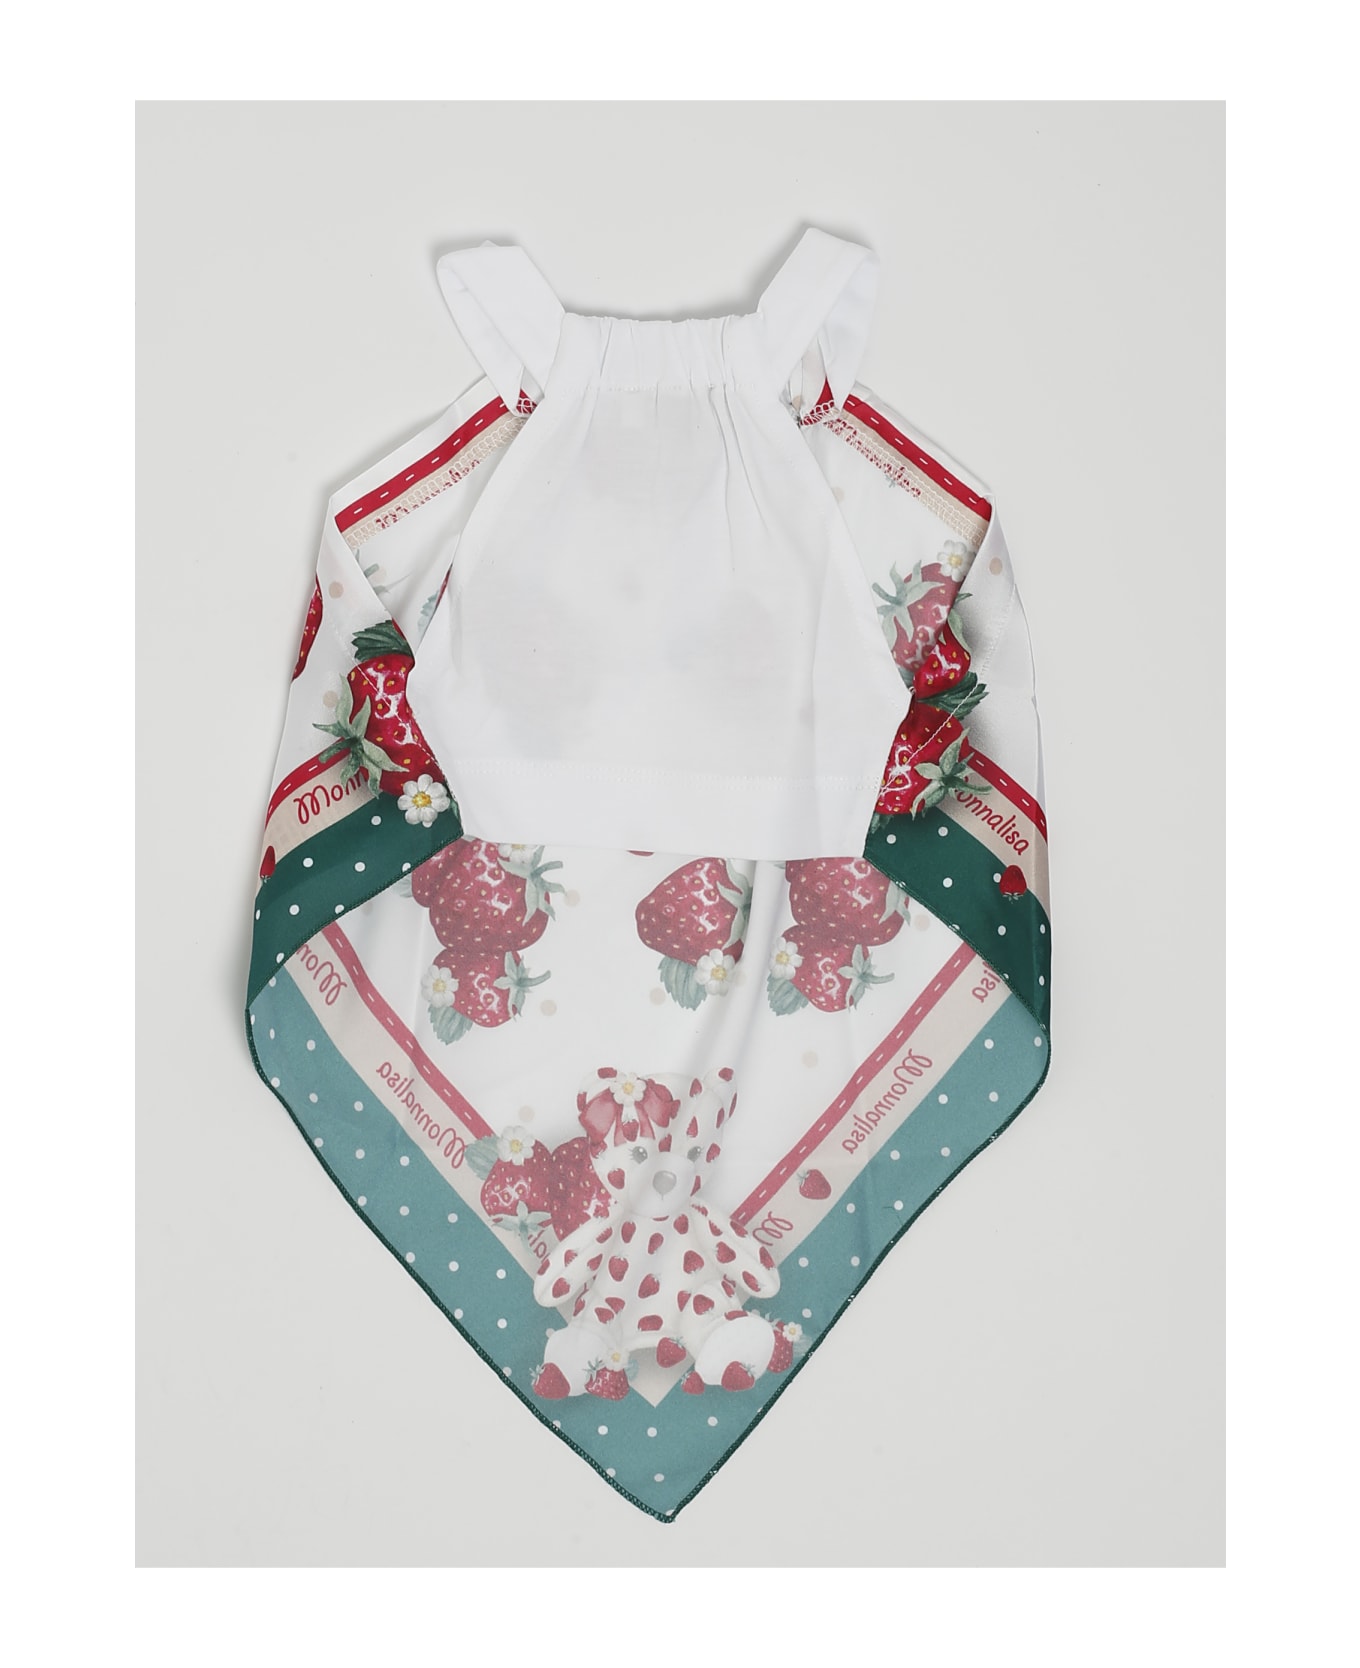 Monnalisa Top Top-wear - BIANCO-ROSSO トップス